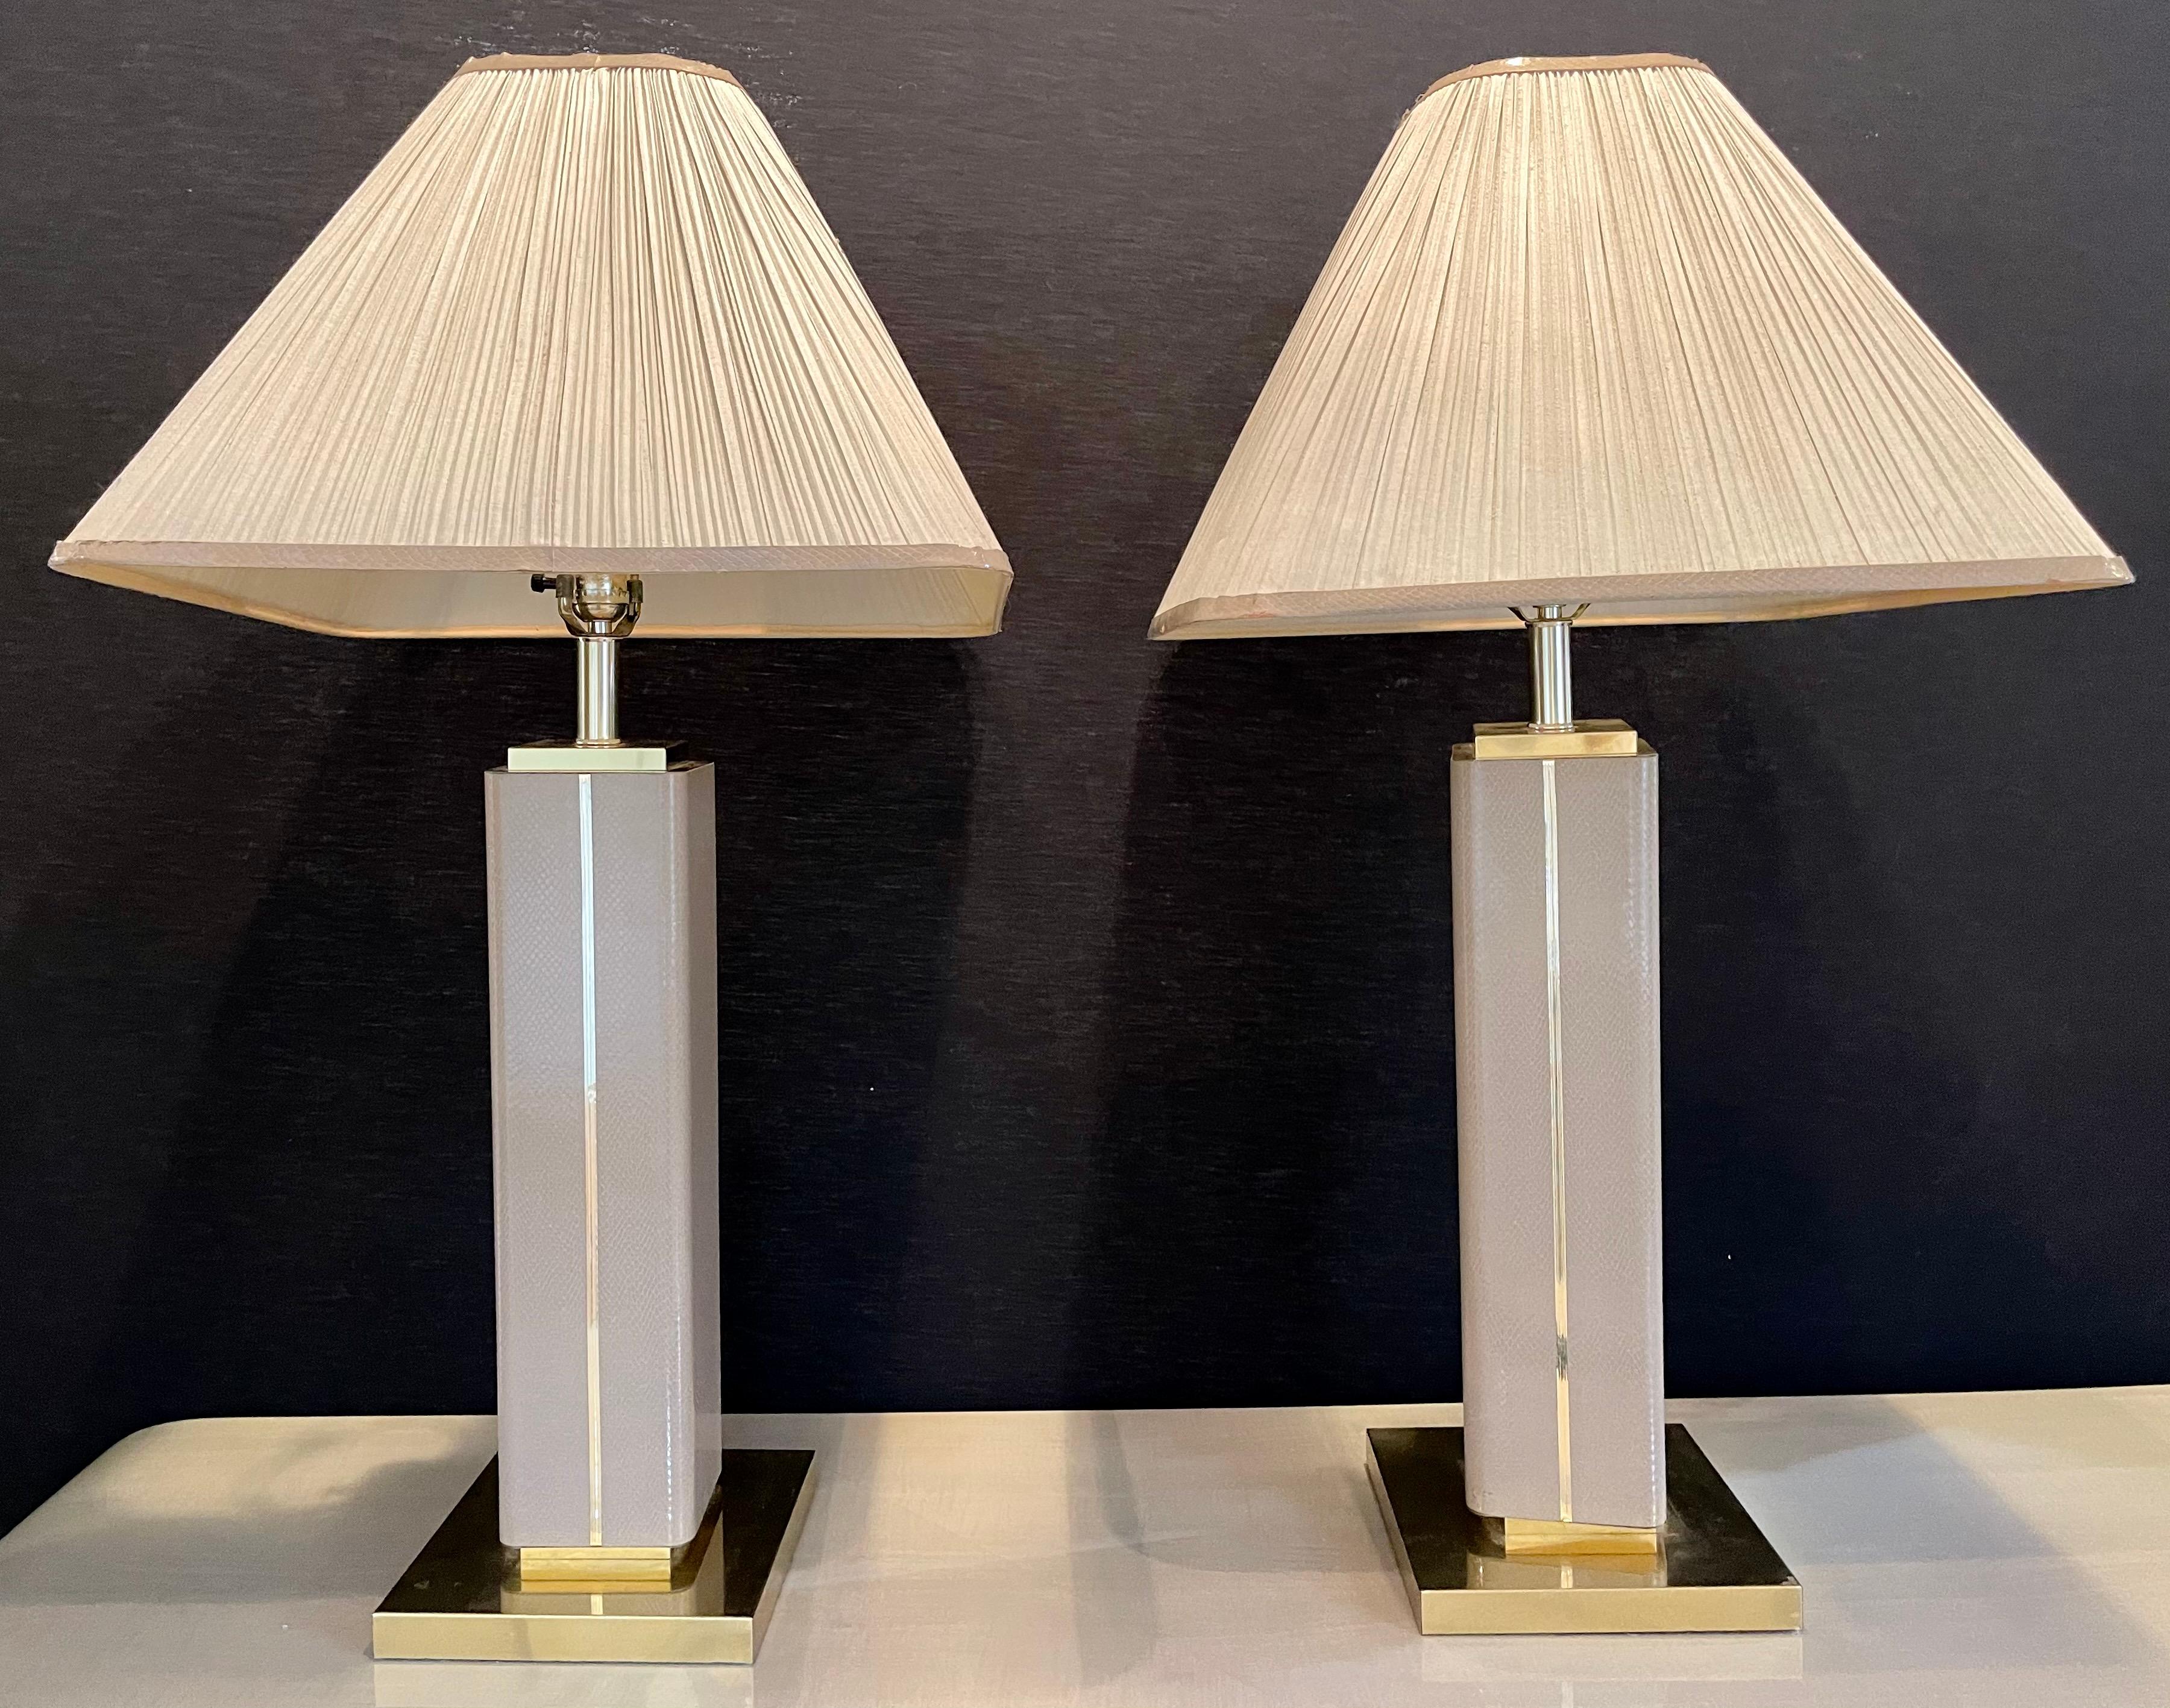 Pair of leather wrapped modern table lamps with custom shades. These table lamps are simply spectacular. Sleek and stylish as one would expect from this highly acclaimed designer. The pair finely wrapped sit on gilt metal bases with matching pole